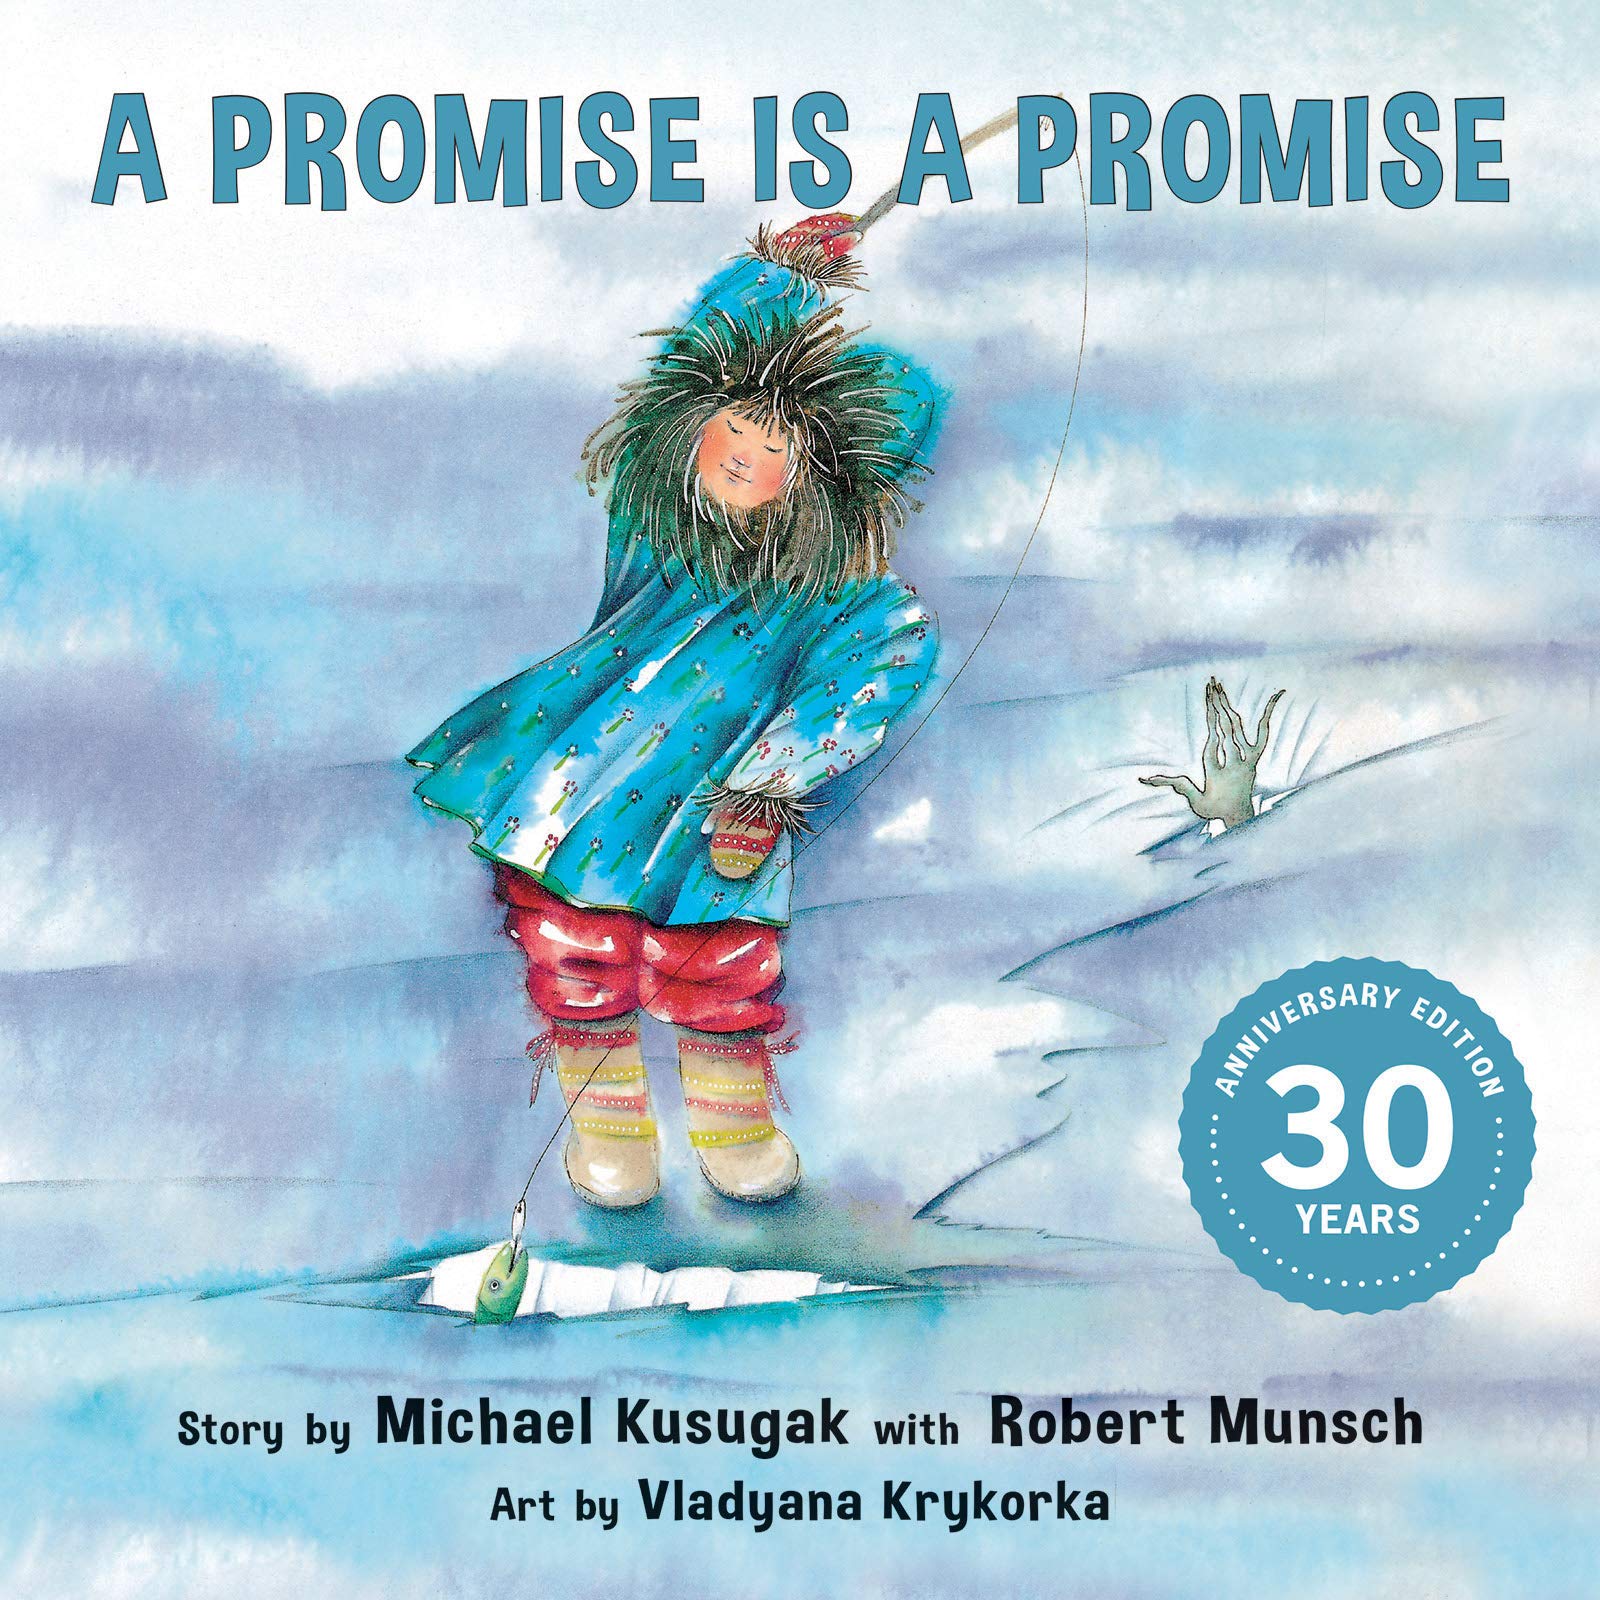 On the cover of “A Promise is a Promise”, an Inuit girl wearing a blue parka with a fur-lined hood, red leggings, and colourful boots, triumphantly pulls a fish out of a crack in the ice she stands on. Behind her, a grey, bony hand emerges from a second crack.